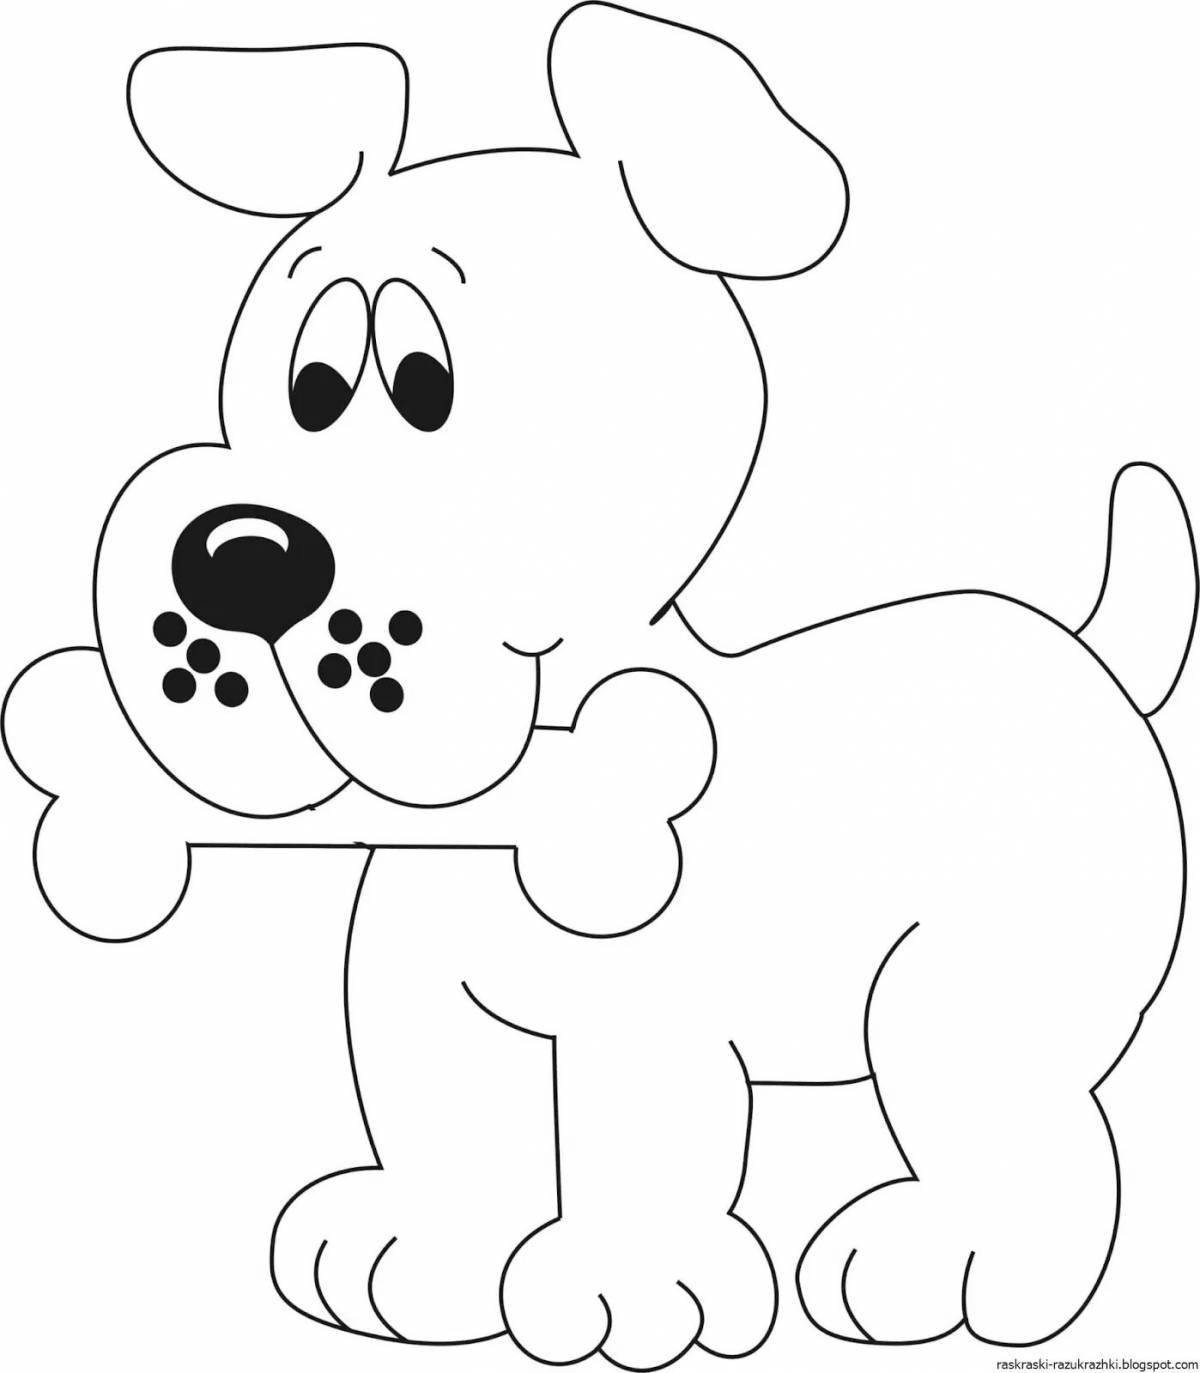 Colouring funny dog ​​for children 2-3 years old